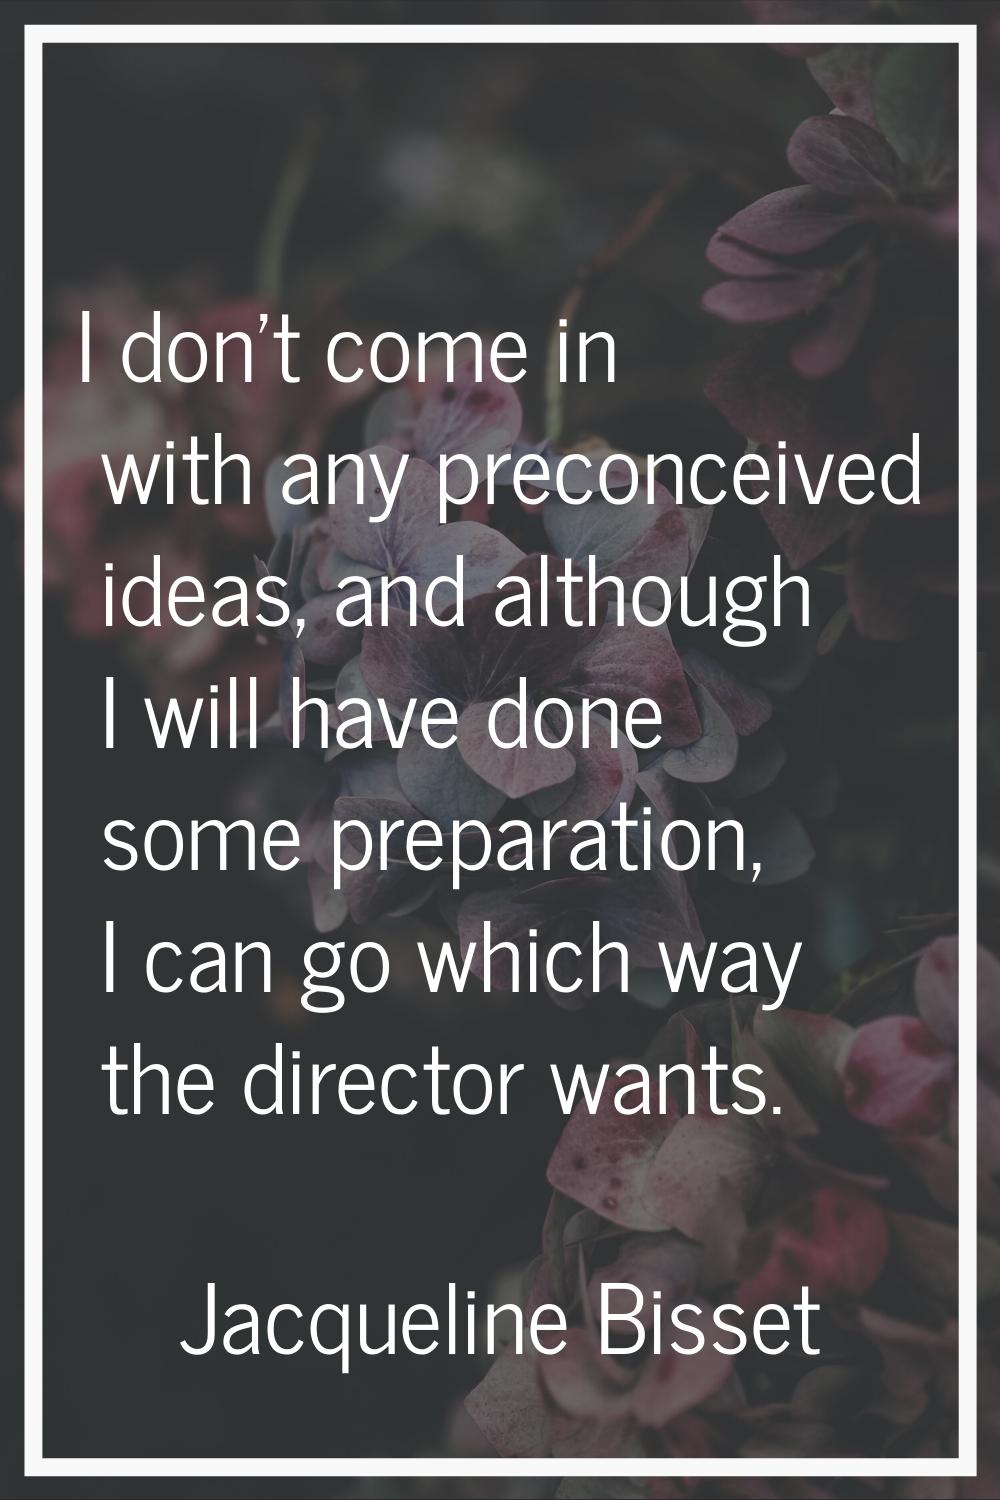 I don't come in with any preconceived ideas, and although I will have done some preparation, I can 